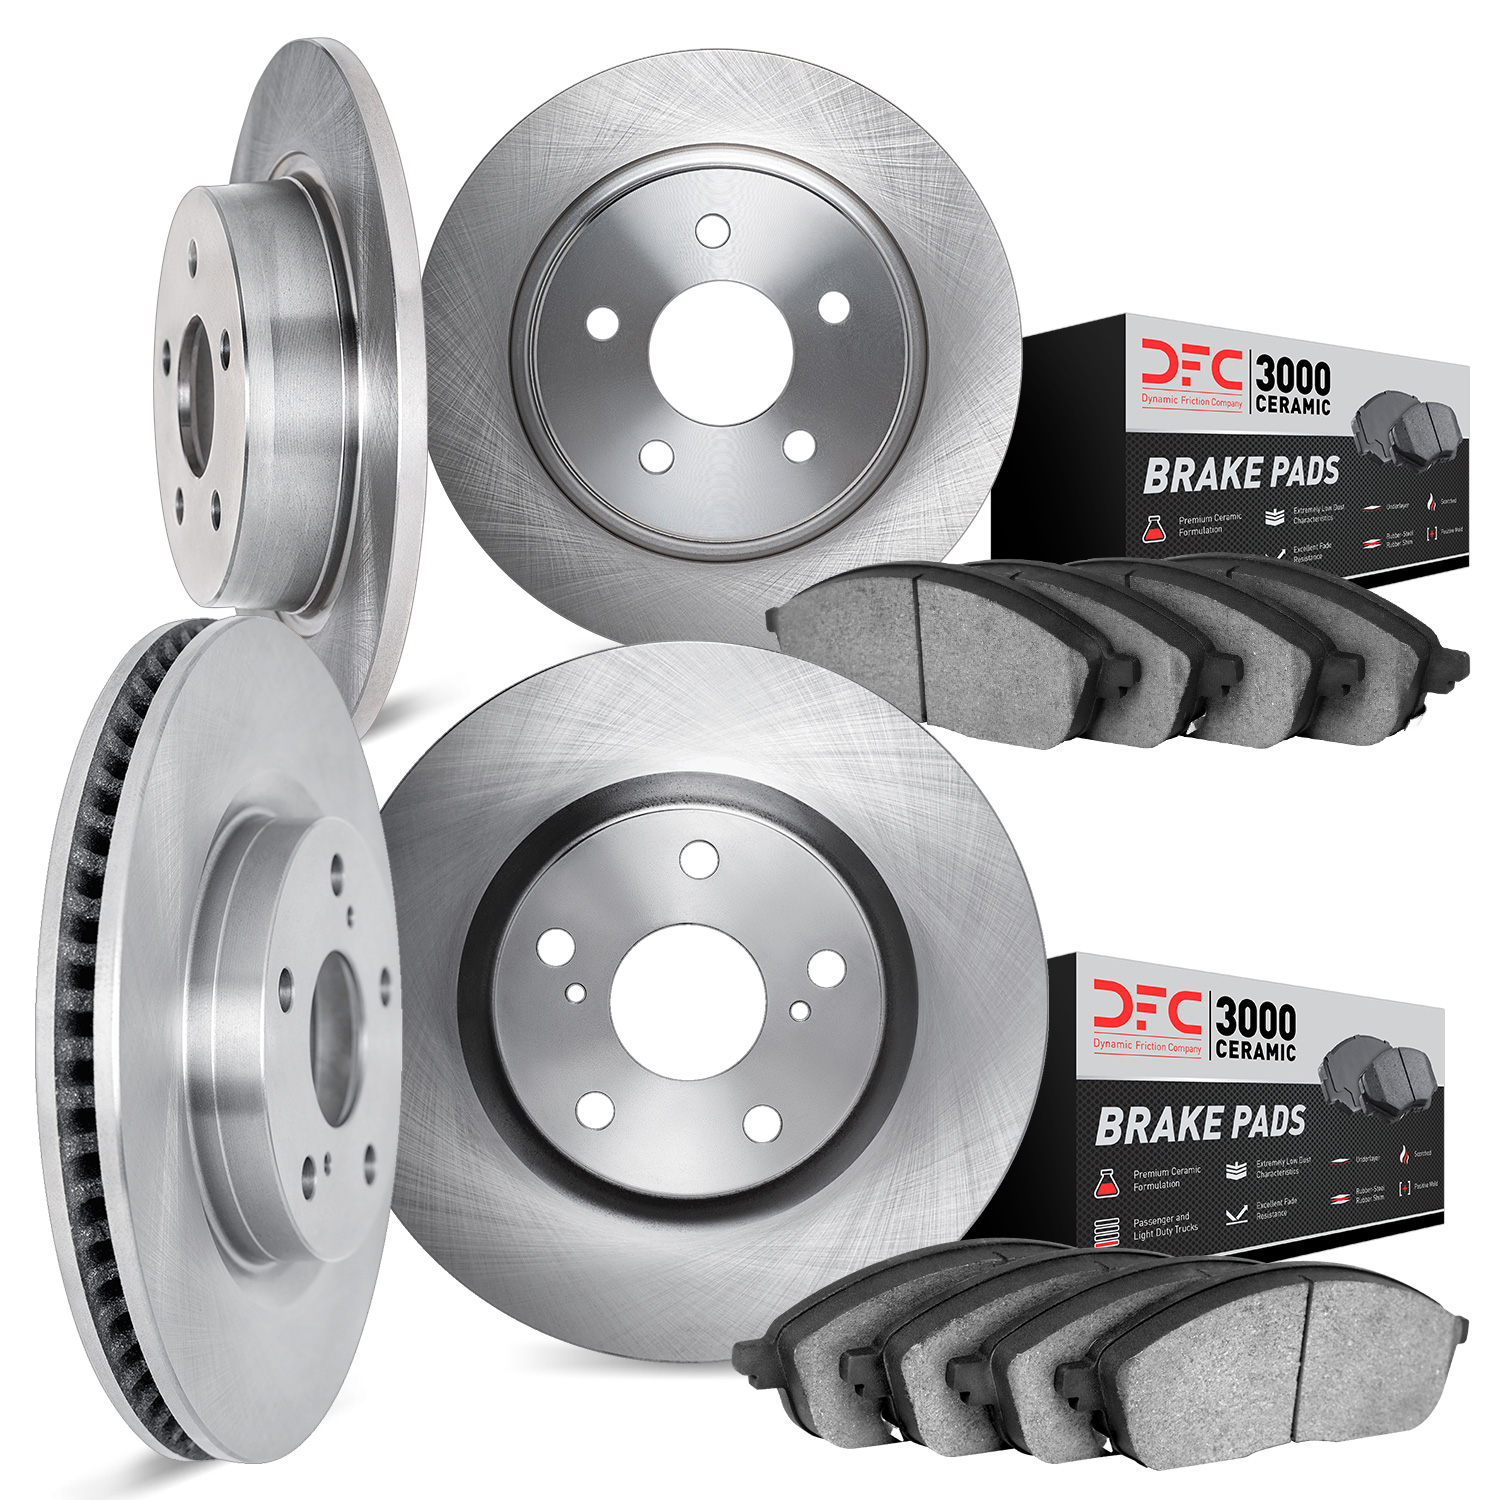 6304-76063 Brake Rotors with 3000-Series Ceramic Brake Pads Kit, 2002-2003 Lexus/Toyota/Scion, Position: Front and Rear